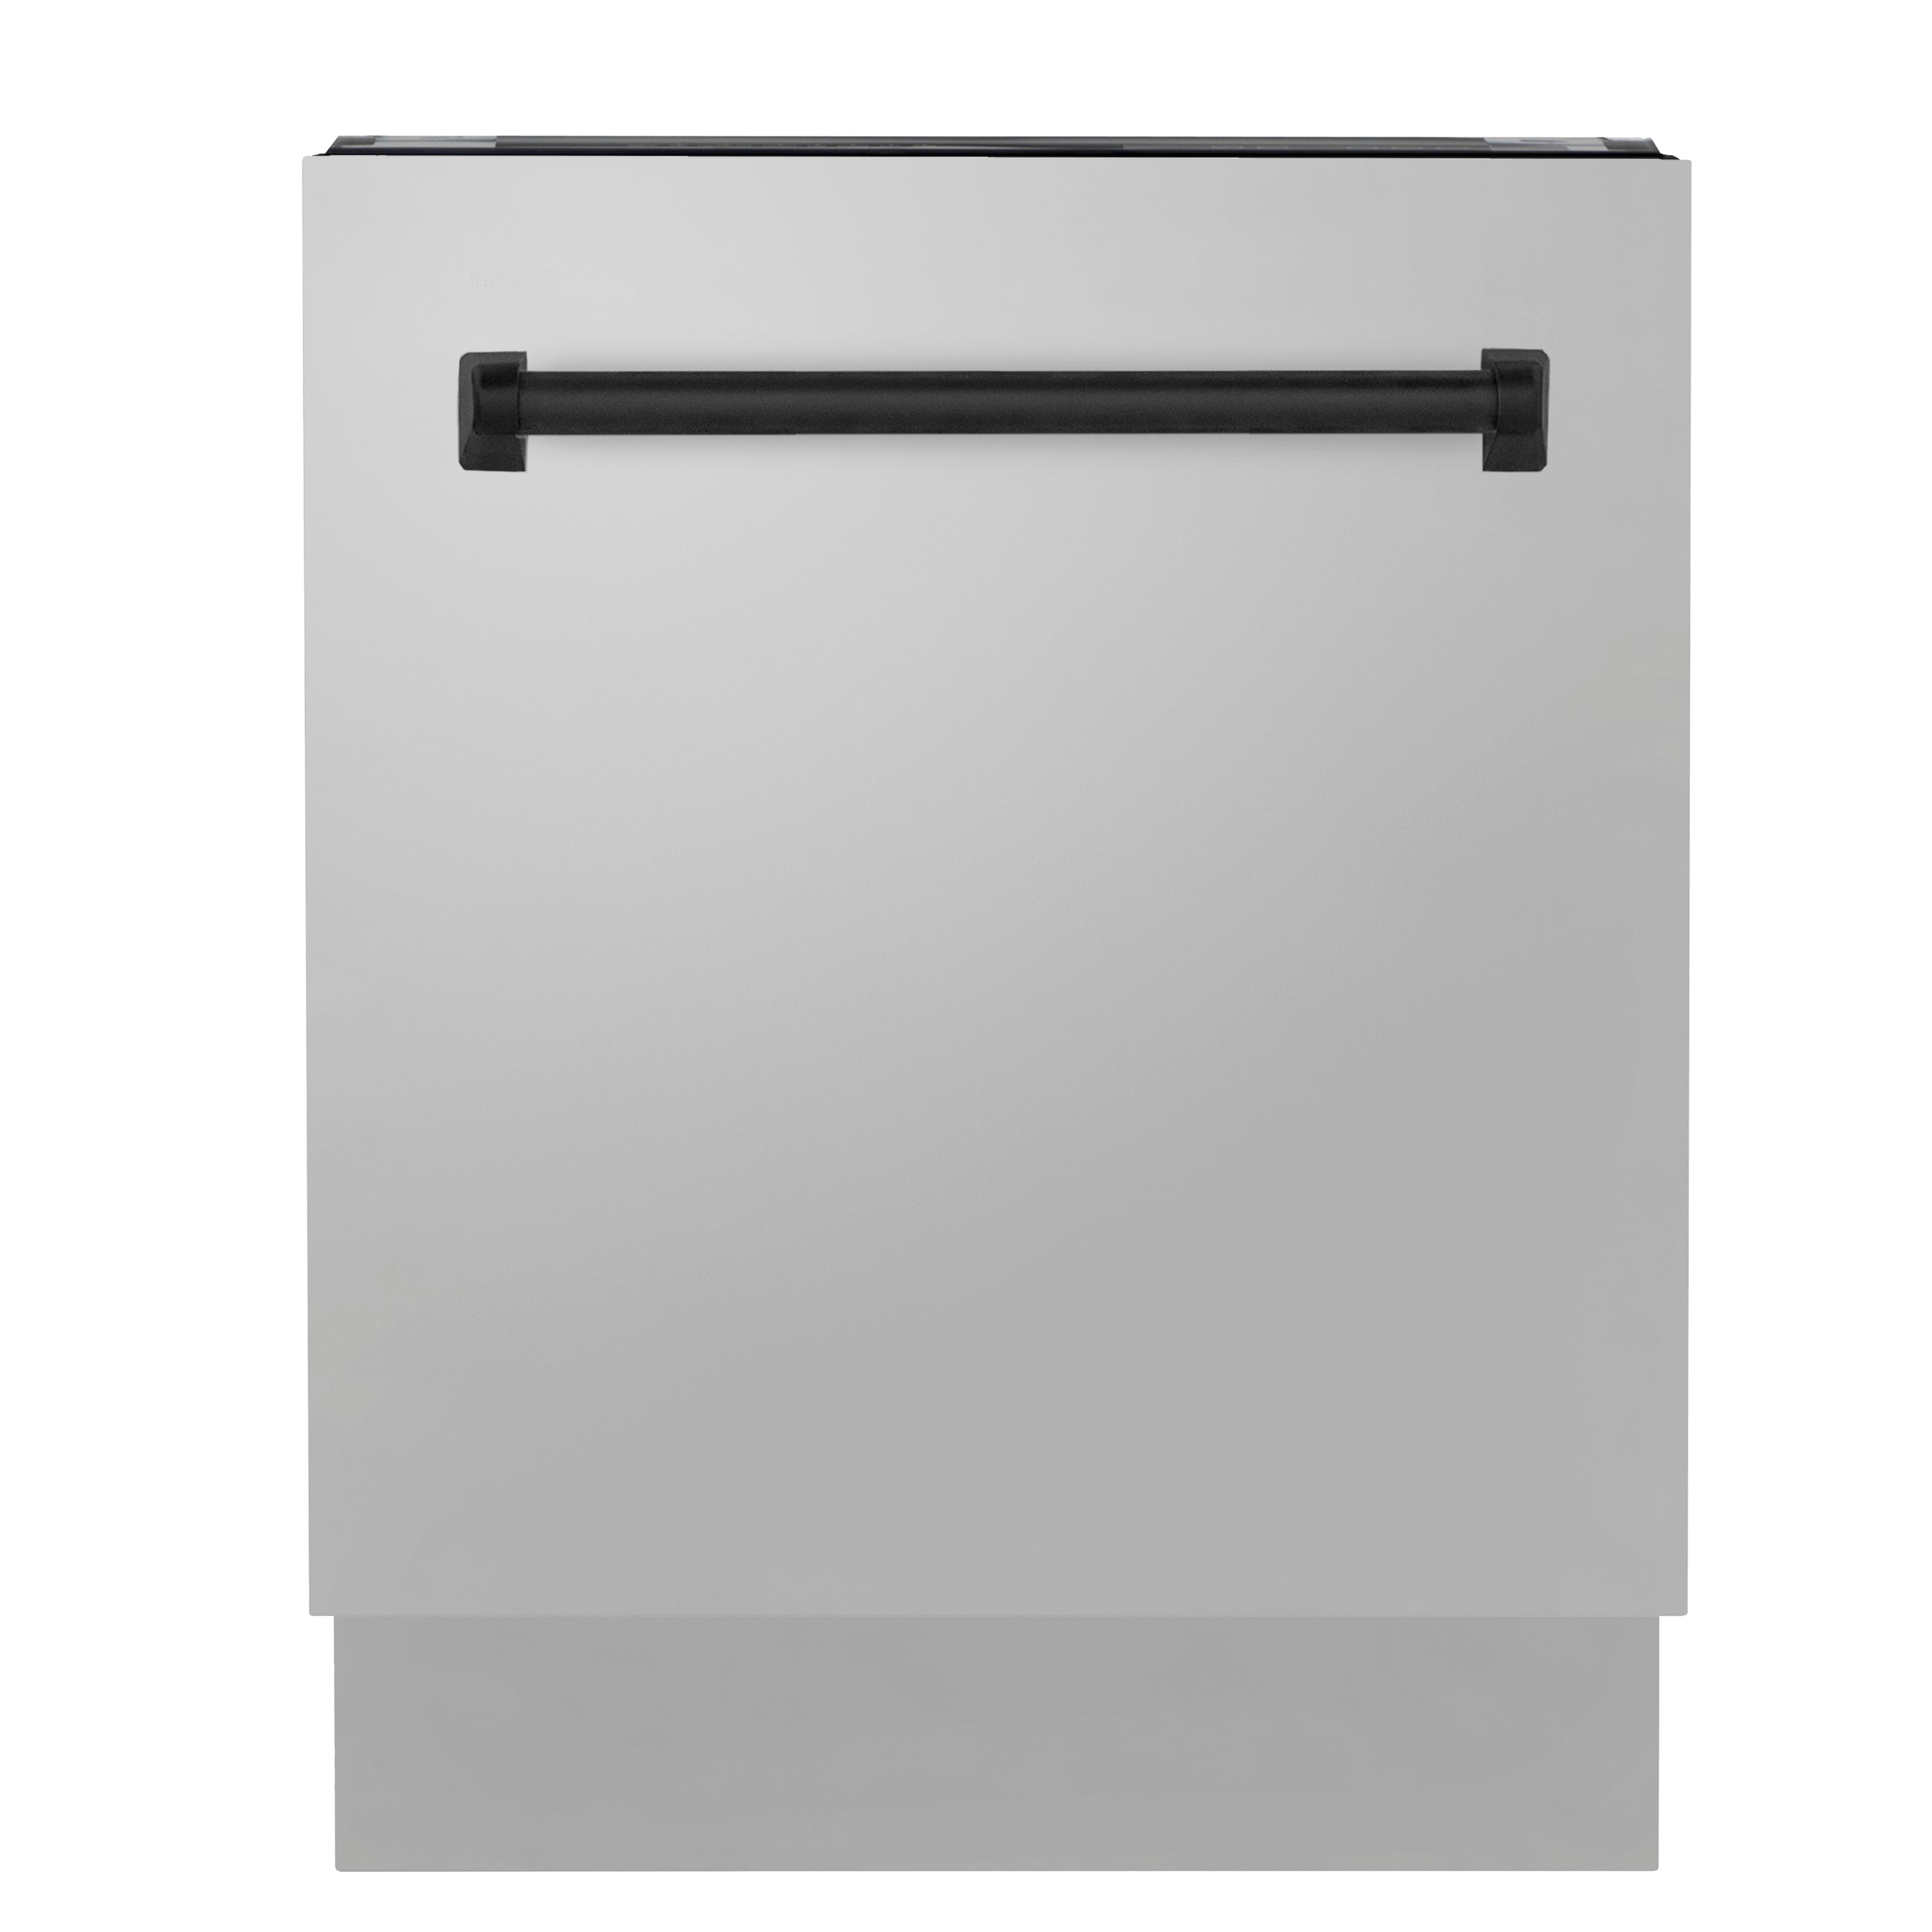 ZLINE Autograph Edition 24" Tallac Series 3rd Rack Top Control Built-In Tall Tub Dishwasher in Stainless Steel with Matte Black Handle, 51dBa (DWVZ-304-24-MB)